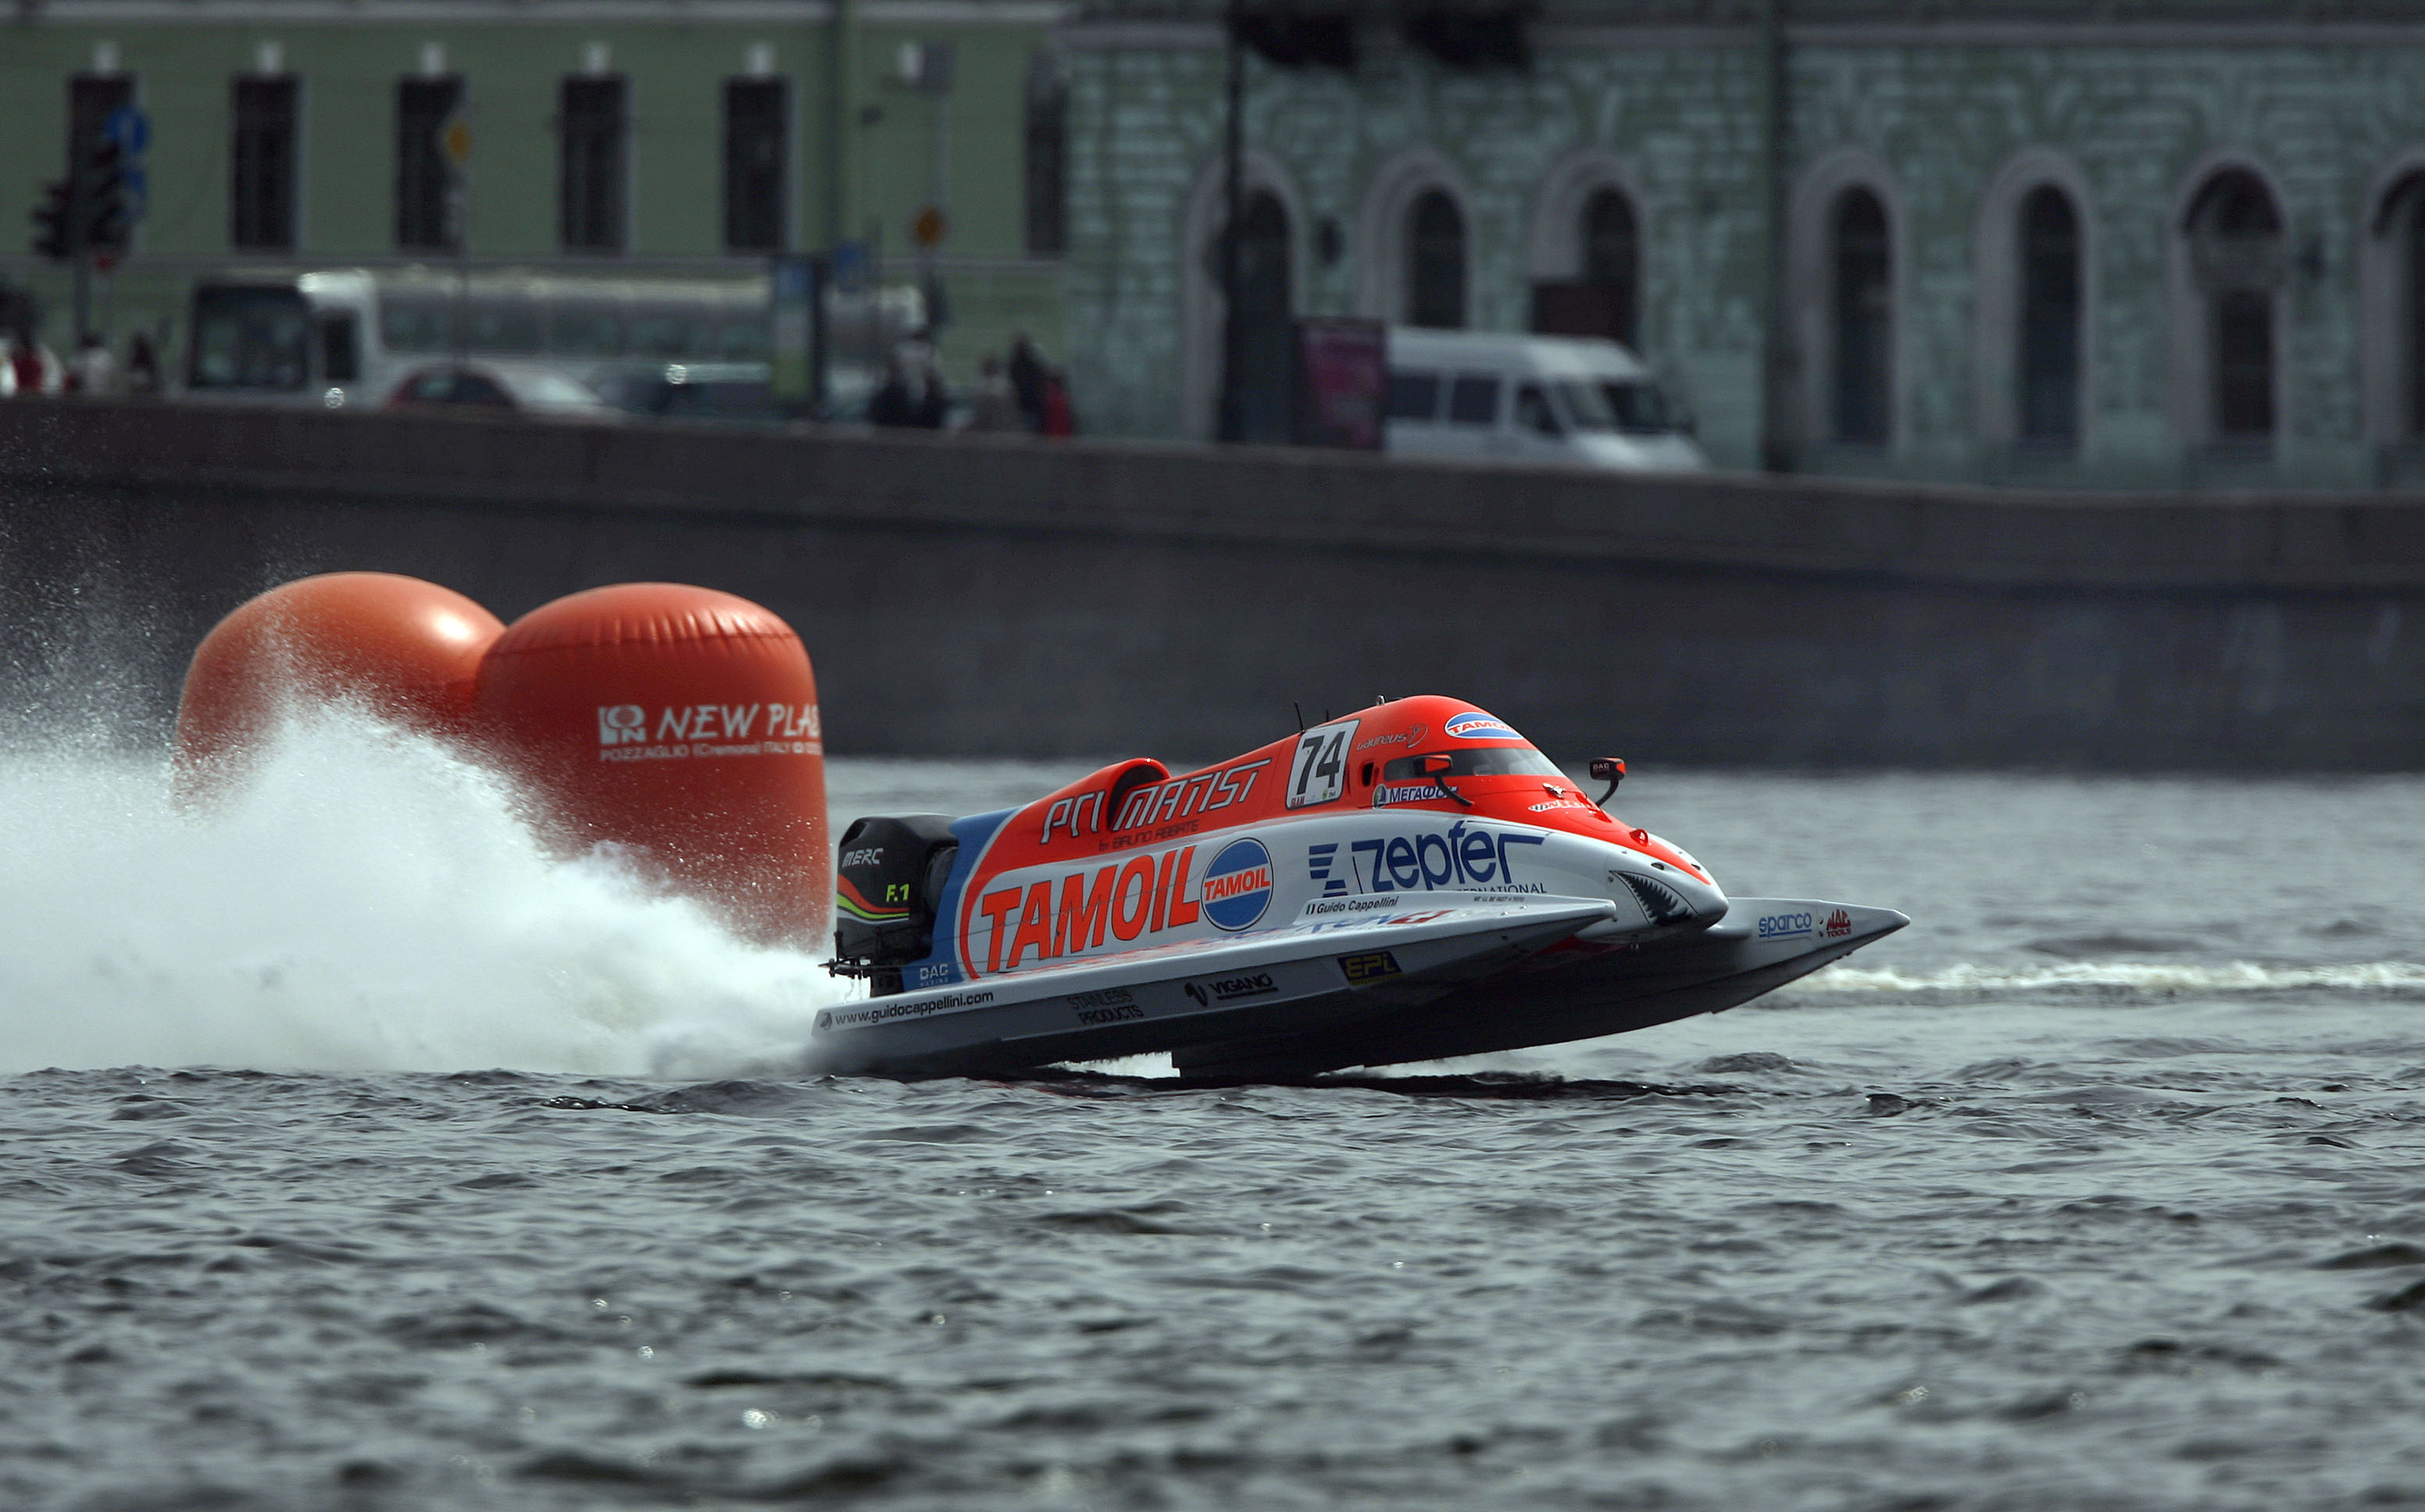 GP OF ST PETERSBURG-140608-PL-Guido Cappellini of Italy of the Tamoil F1 powerboat team pictured during the time trials on the Neva River in St Petersburg, Russia, venue of the UIM F1 powerboat Grand Prix, the 4th leg of the world championship series. Picture by Paul Lakatos/Idea Marketing.